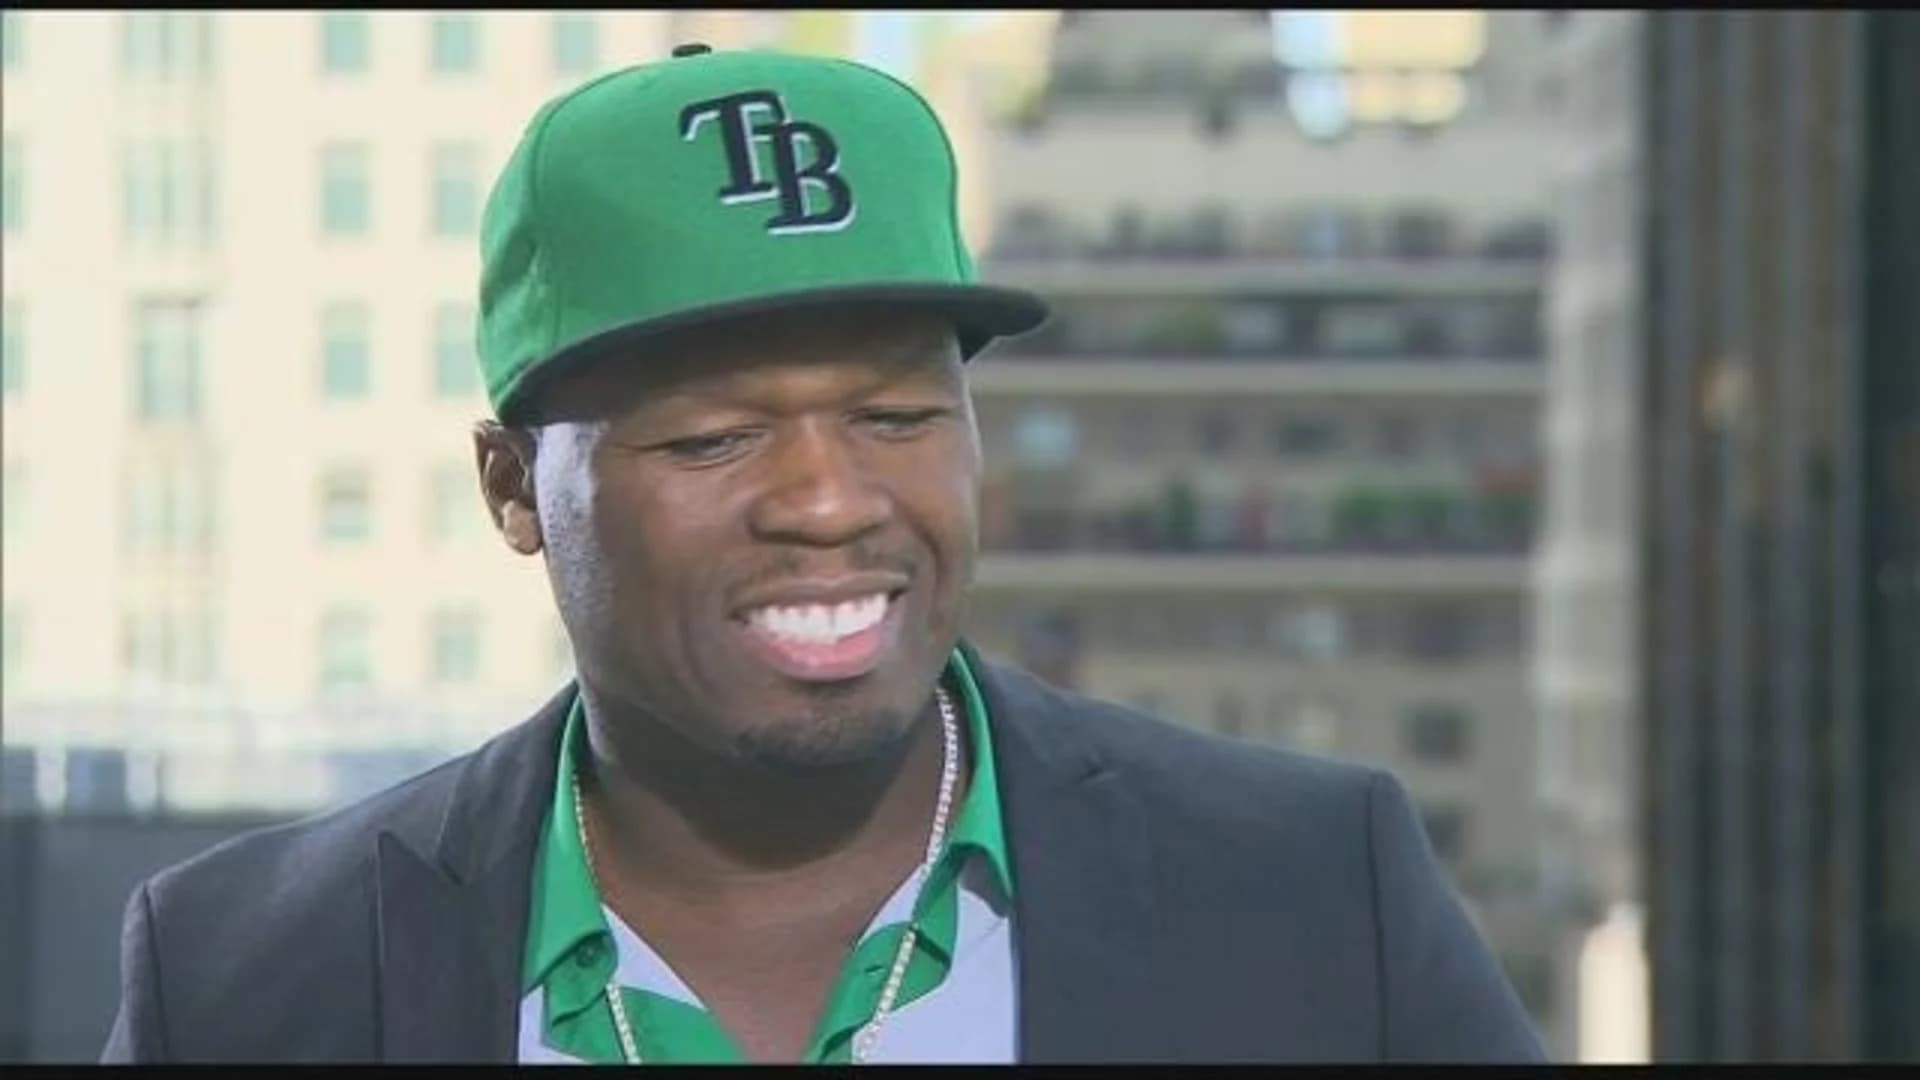 50 Cent considers legal action over alleged threat by NYPD commanding officer